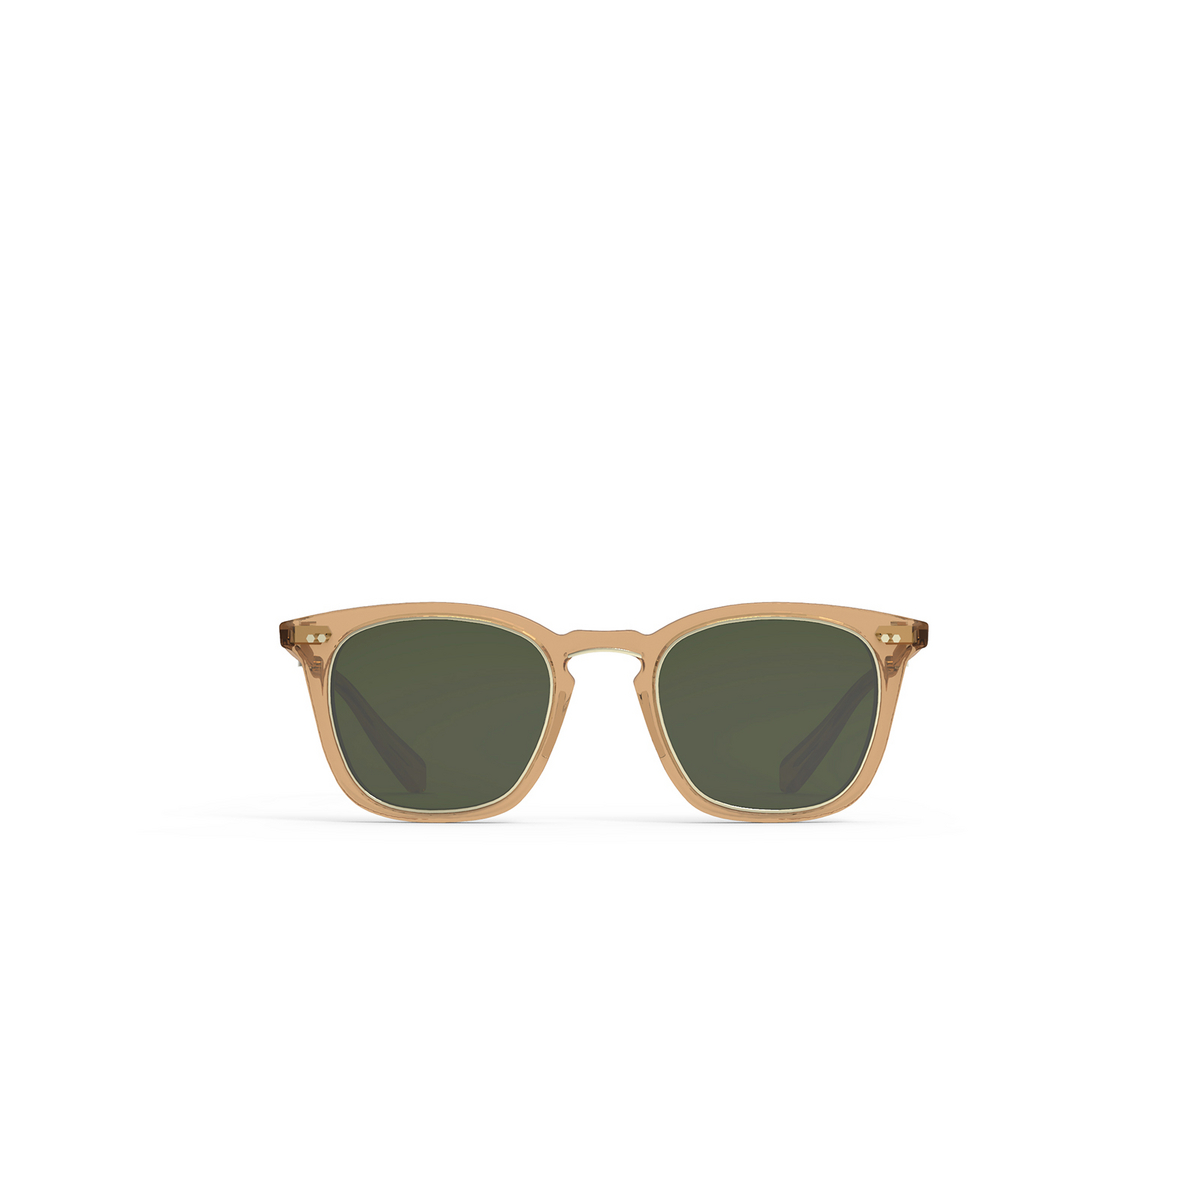 Mr. Leight® Square Sunglasses: Getty Ii S color Matte Topaz-matte White Gold/green MTOP-12KMWG/GRN - front view.